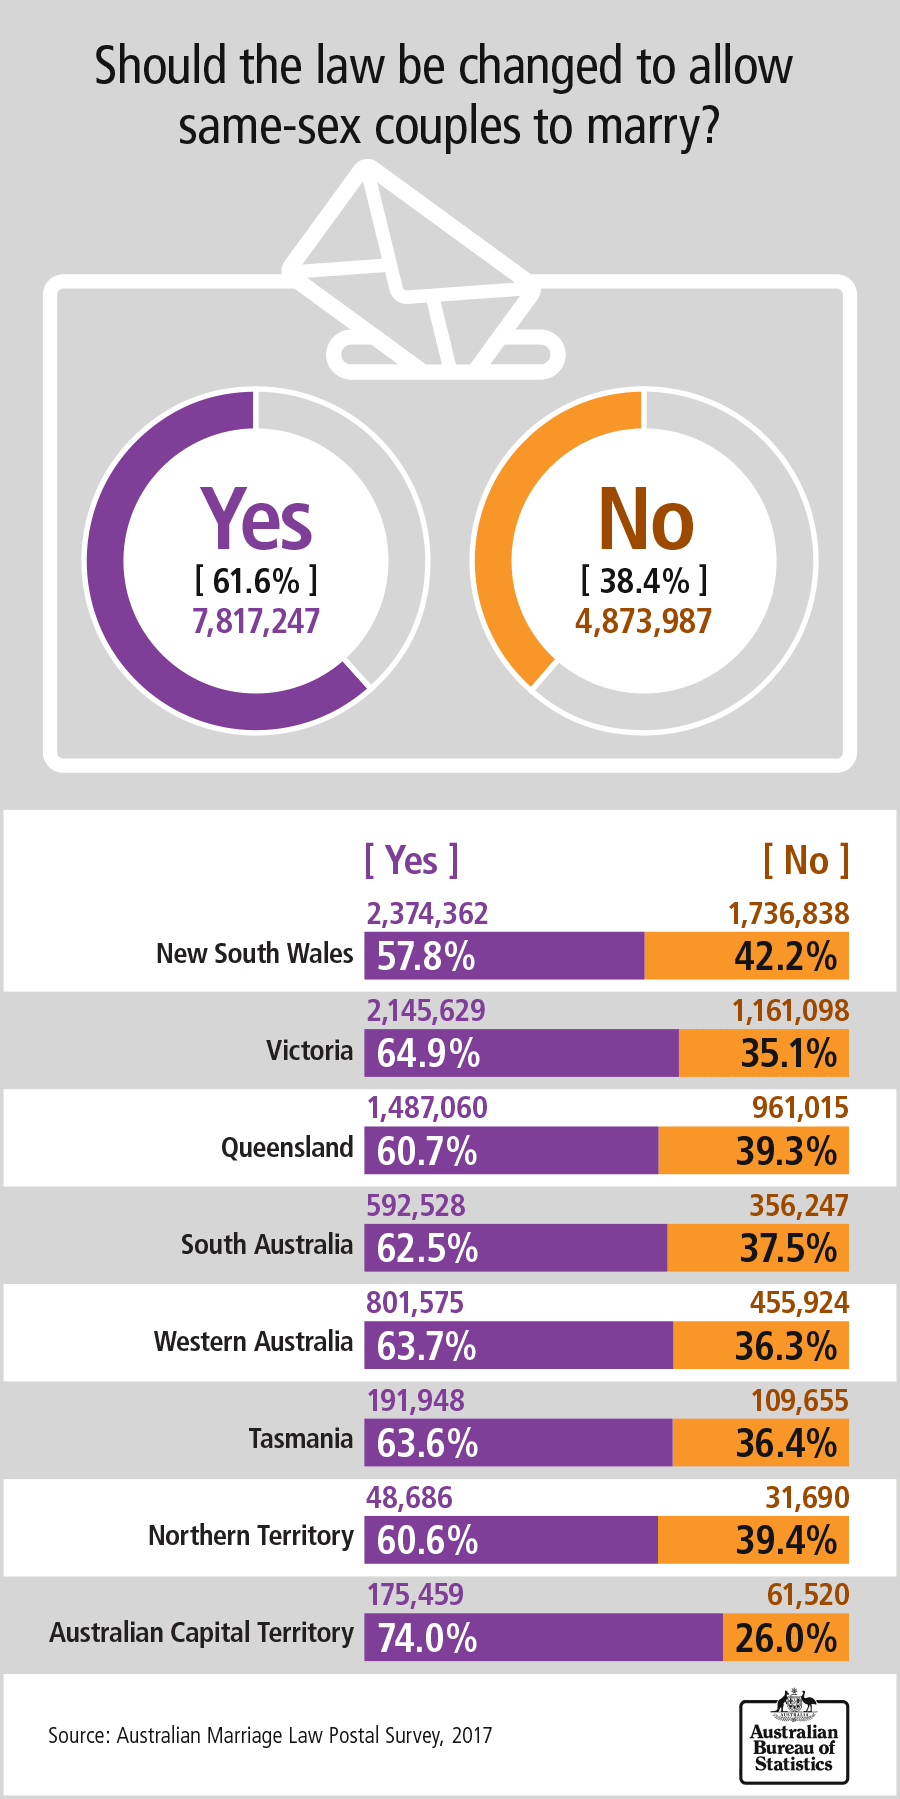 Infographic showing the Yes (61.6% or 7,817,247) and No (38.4% or 4,873,987) response percentages and numbers at the national level and the Yes and No response percentages and numbers at the state and territory level. More details following.